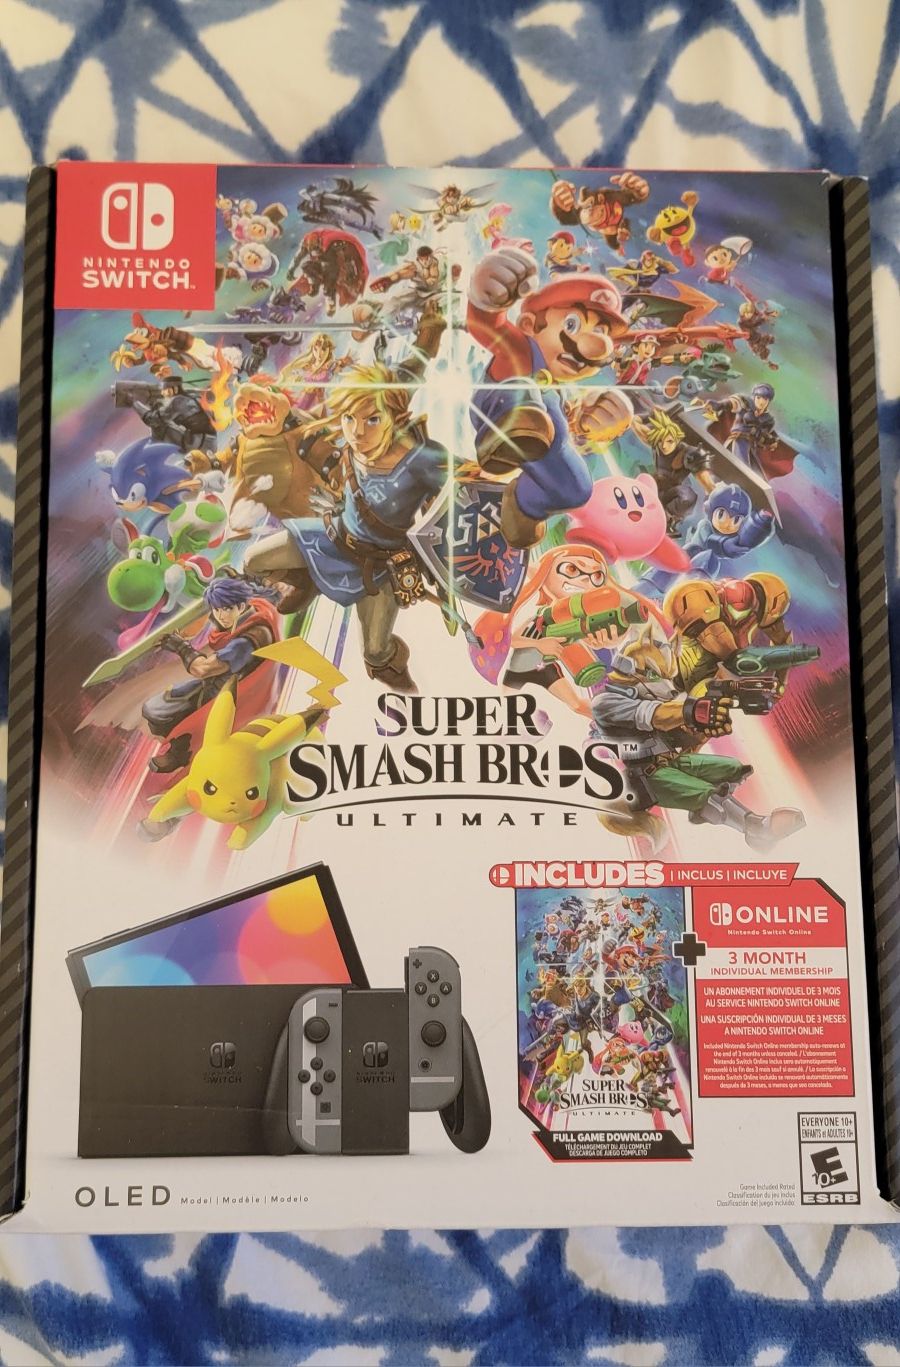 Nintendo Switch OLED Super Smash Bros Ultimate Edition CASH ONLY